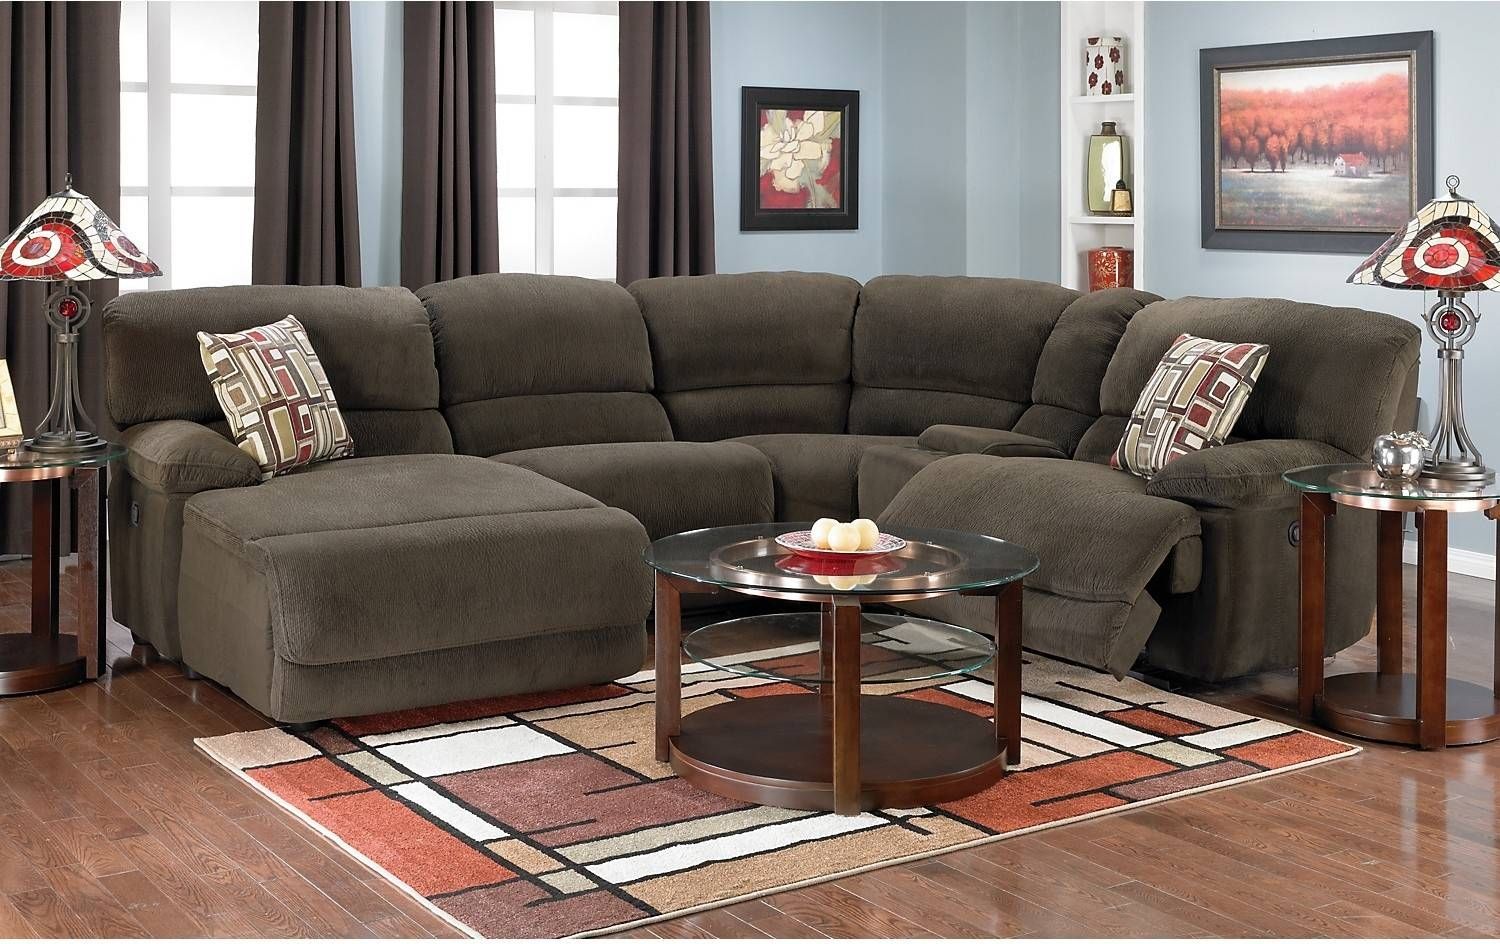 Sofa : Theatre Sectional Sofas Excellent Home Design Fresh At Within Theatre Sectional Sofas (Photo 4 of 30)